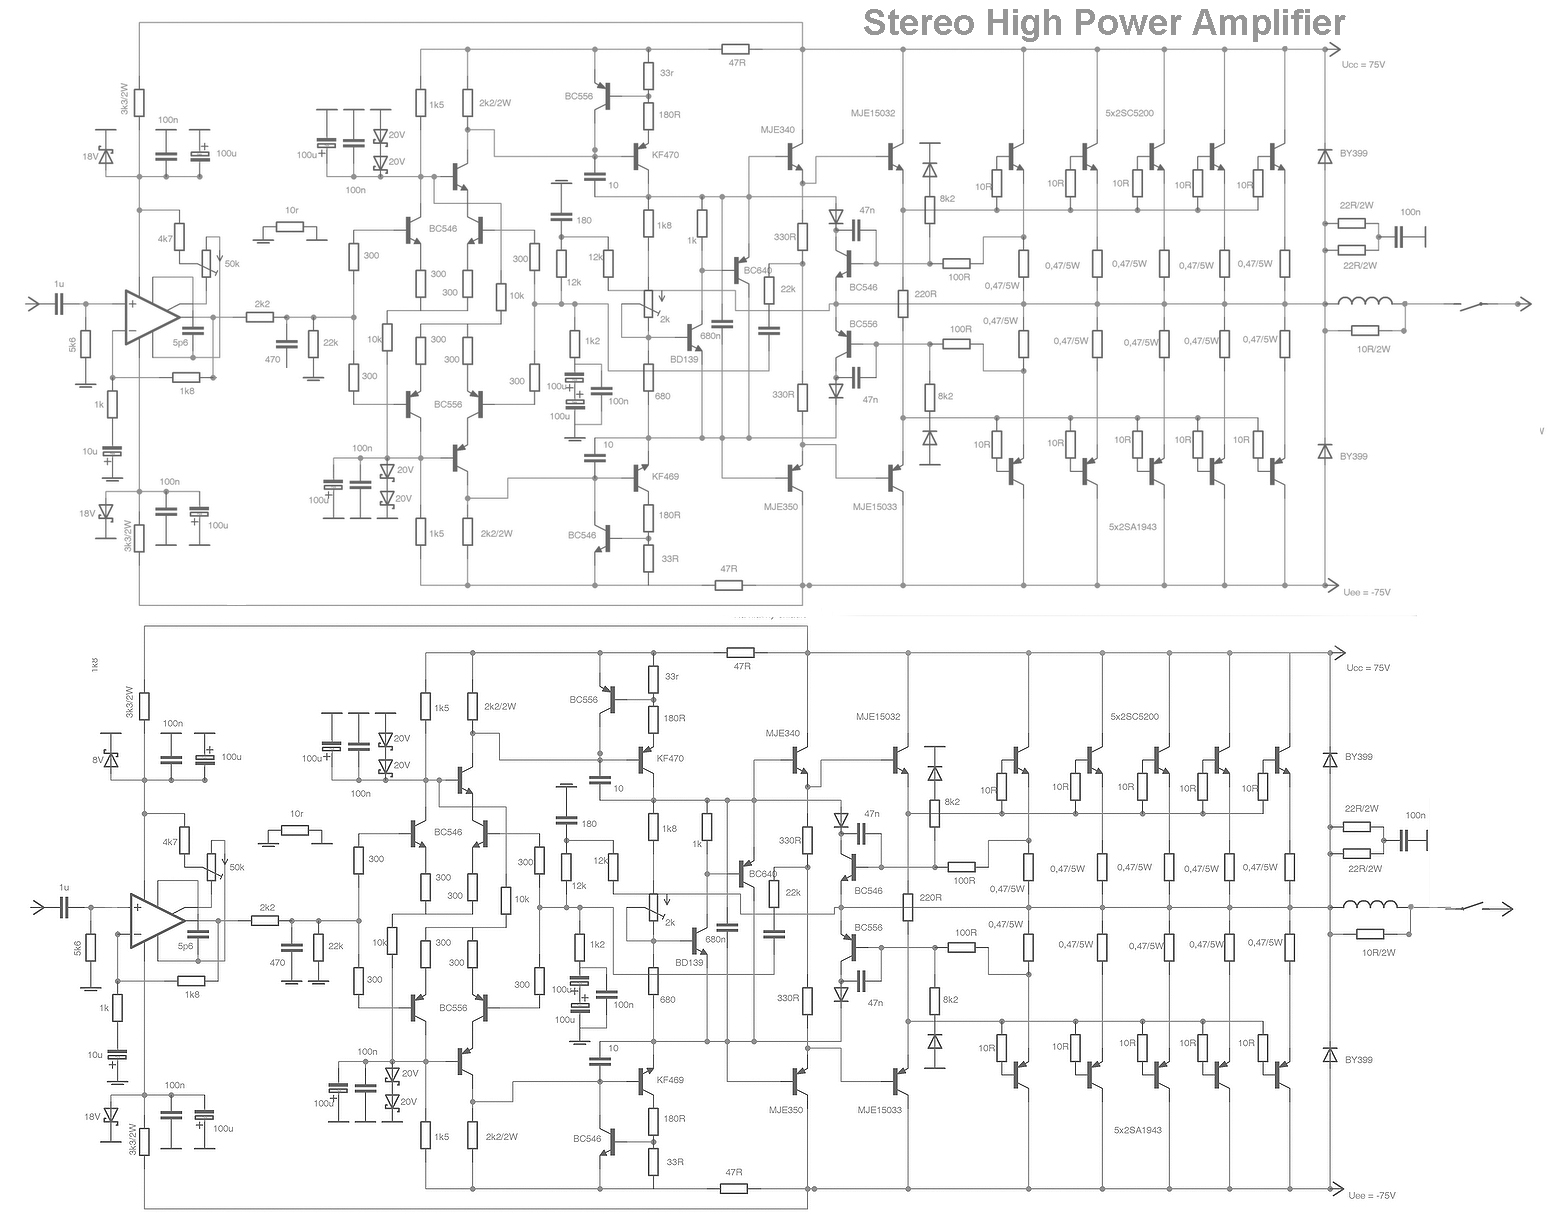 Stereo High Power Audio Amplifier - Electronic Circuit